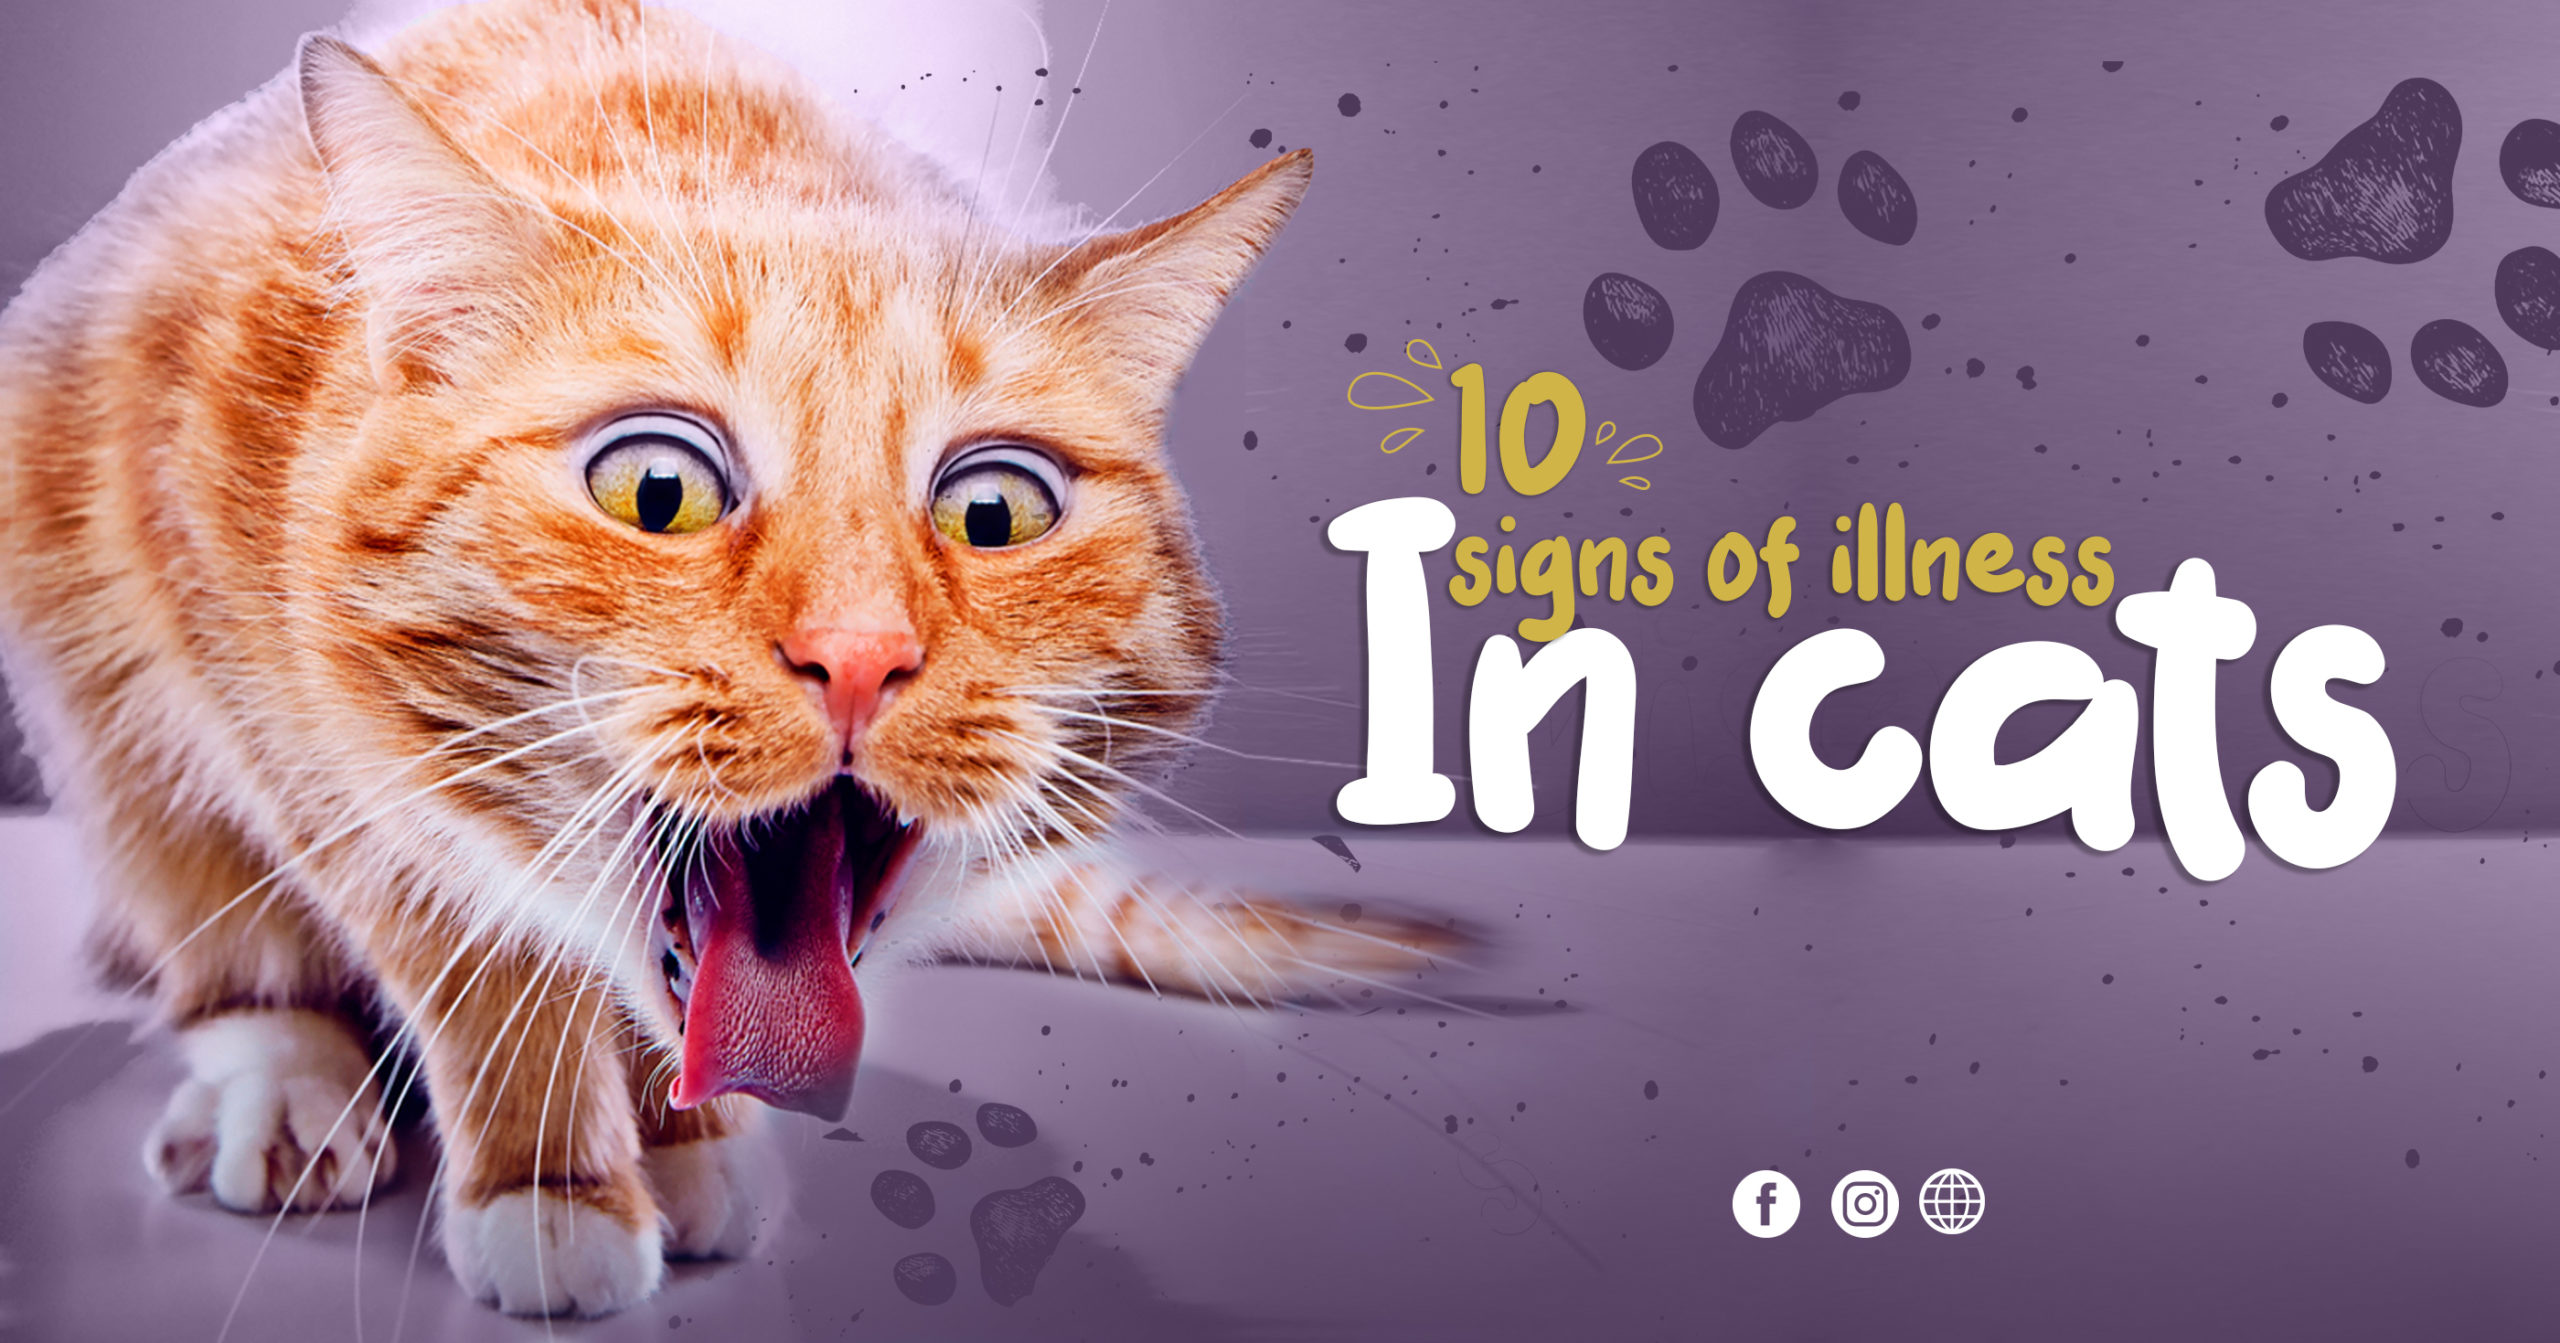 10 signs of illness in cats